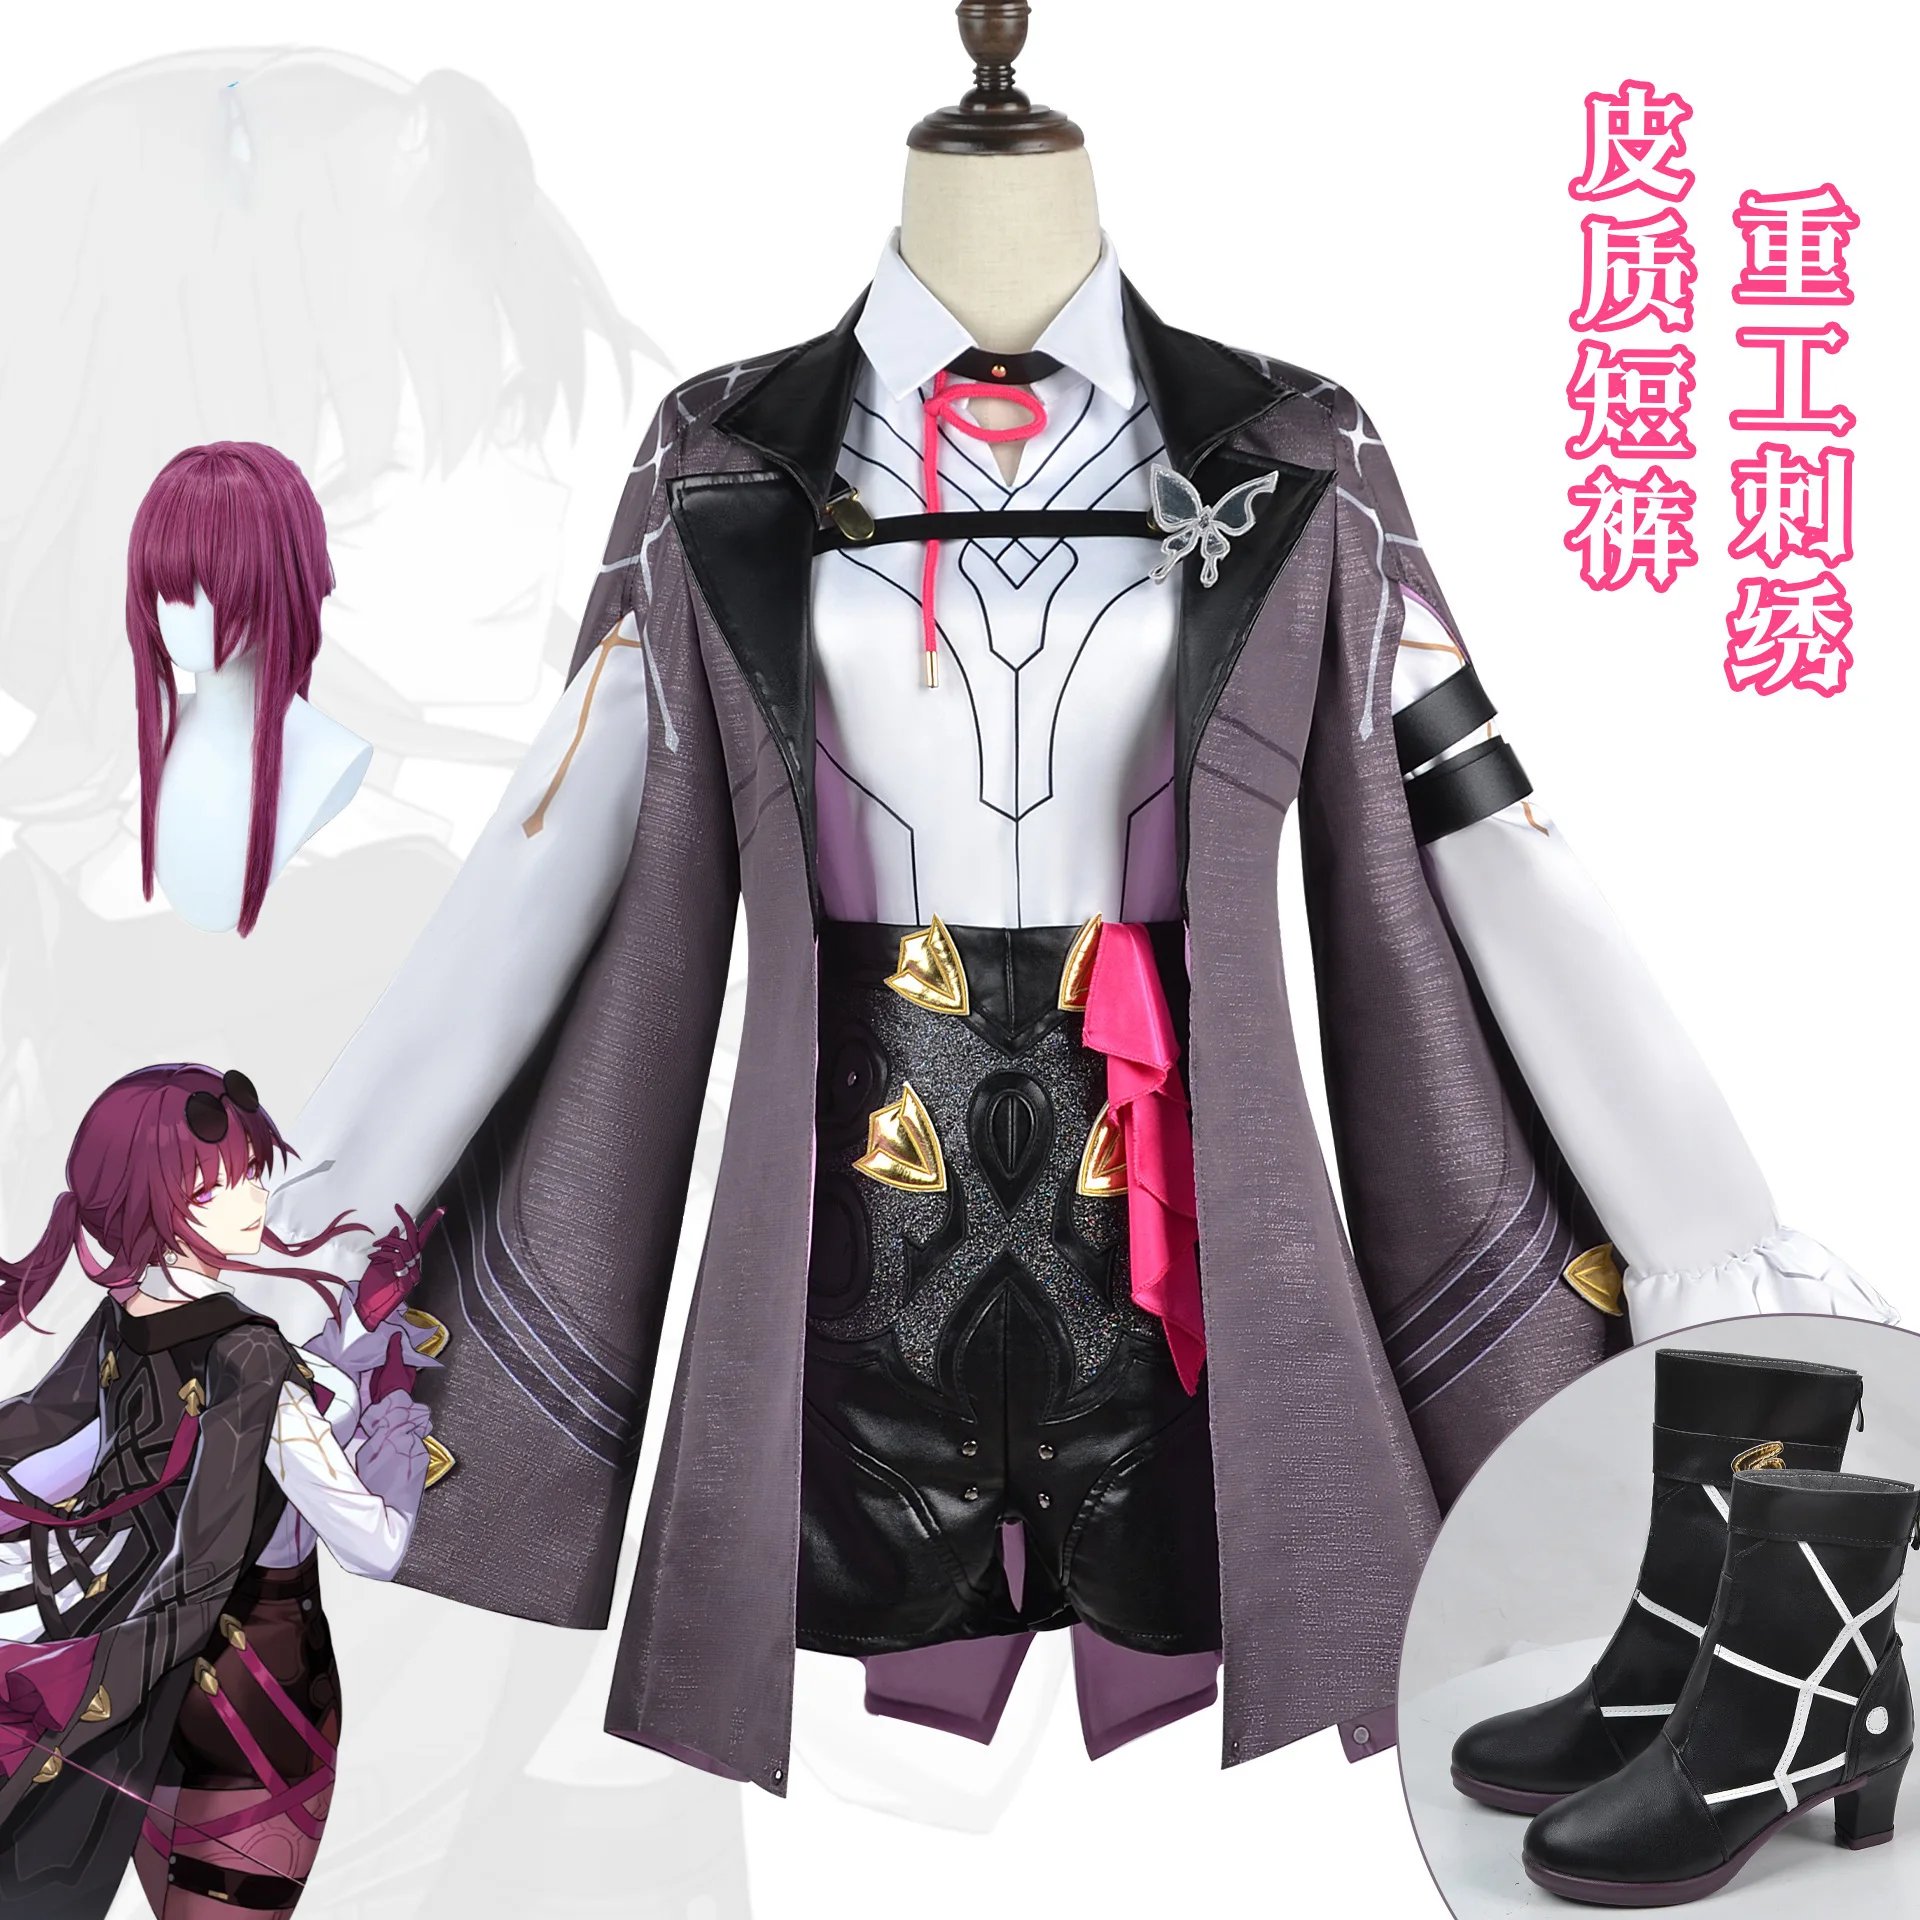 

Kafka Cosplay Anime Game Honkai: Star Rail Costume Sweet Lovely Combat Uniform Women Halloween Party Role Play Clothing Outfit